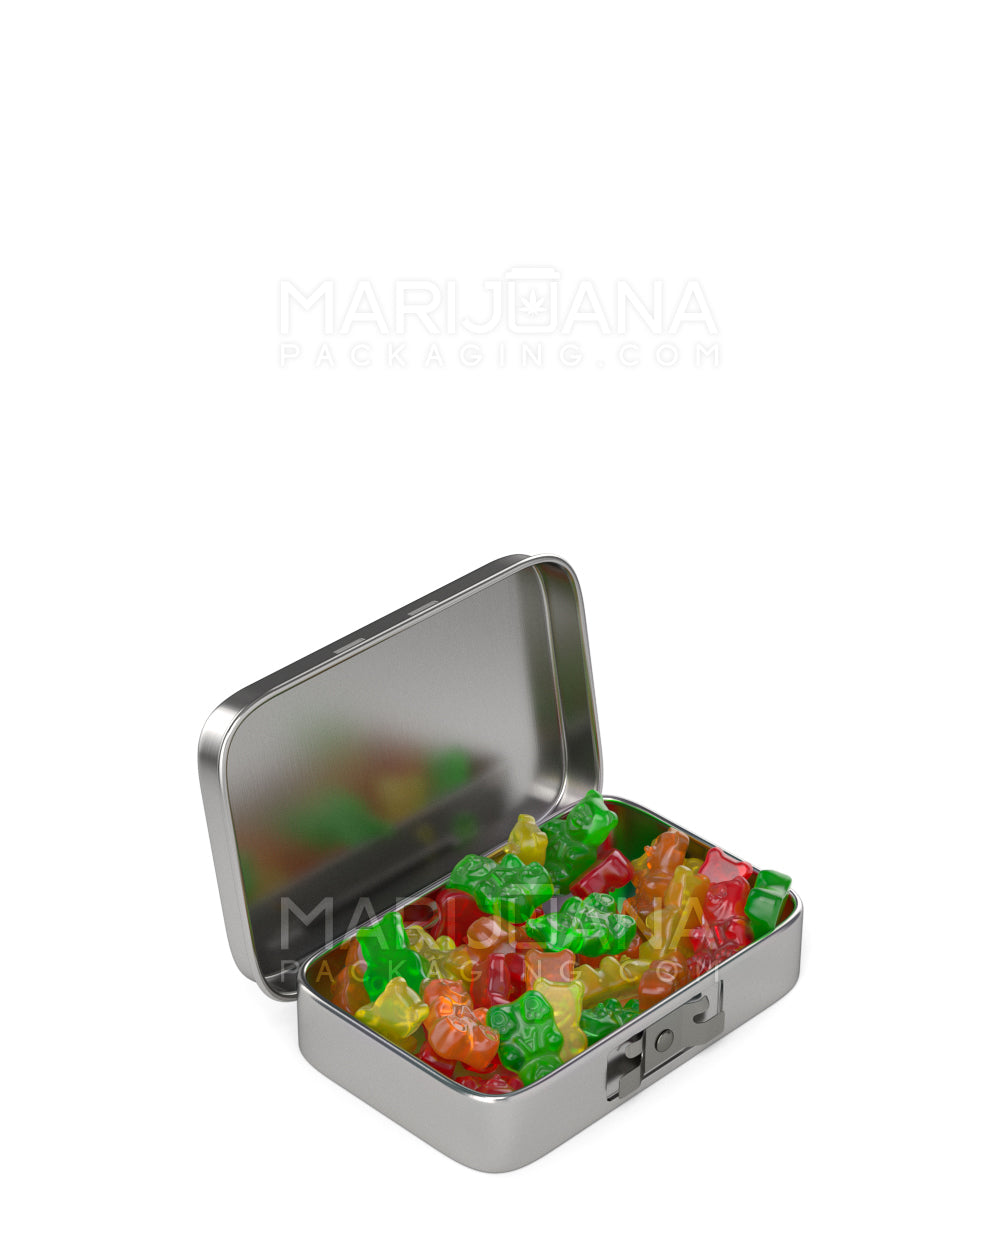 Child Resistant | 100% Recyclable Safely Lock Ultra Edible & Joint Box | 79mm x 53.5mm - Silver Tin - 2